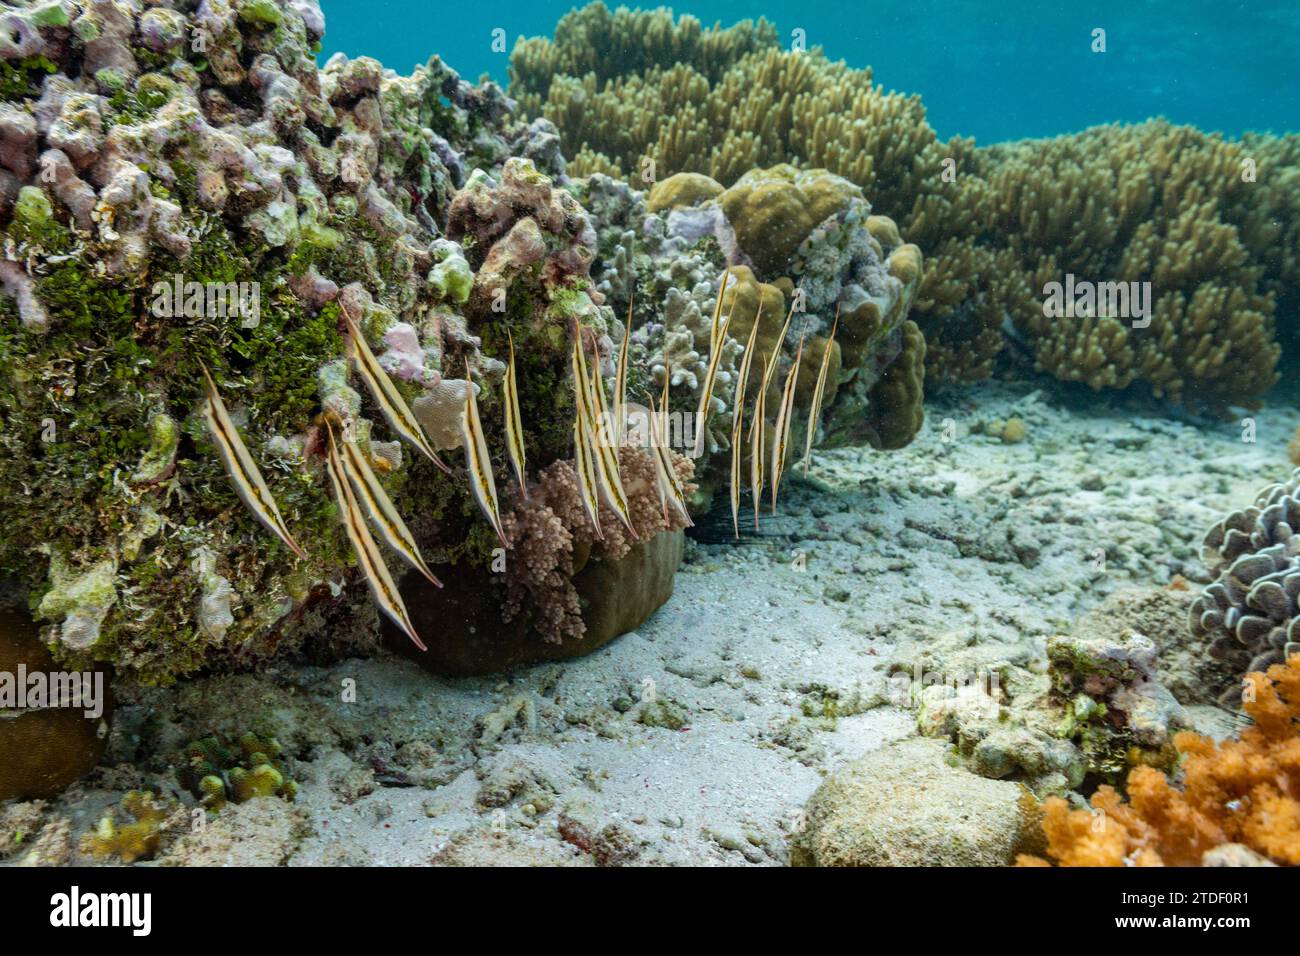 A school of jointed razorfish (Aeoliscus strigatus) in their usual head down formation, off Bangka Island, Indonesia, Southeast Asia, Asia Stock Photo